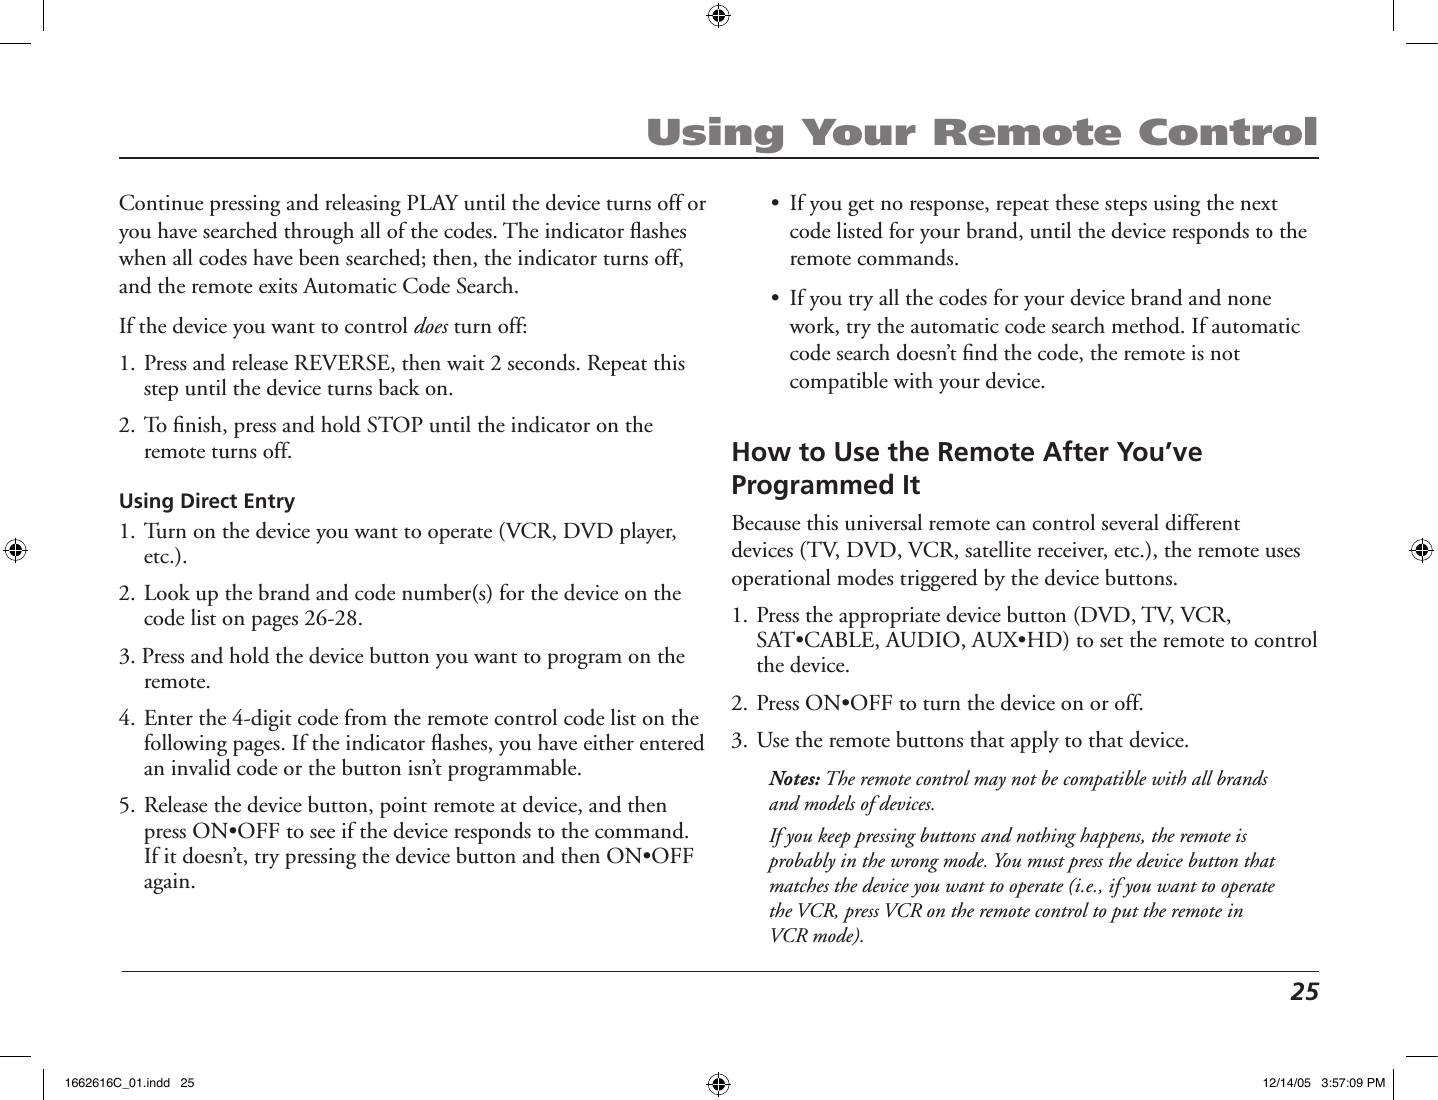  25Using Your Remote ControlHow to Use the Remote After You’ve Programmed ItBecause this universal remote can control several different devices (TV, DVD, VCR, satellite receiver, etc.), the remote uses operational modes triggered by the device buttons.1. Press the appropriate device button (DVD, TV, VCR, SAT•CABLE, AUDIO, AUX•HD) to set the remote to control the device.2. Press ON•OFF to turn the device on or off.3. Use the remote buttons that apply to that device.Notes: The remote control may not be compatible with all brands and models of devices. If you keep pressing buttons and nothing happens, the remote is probably in the wrong mode. You must press the device button that matches the device you want to operate (i.e., if you want to operate the VCR, press VCR on the remote control to put the remote in VCR mode).Continue pressing and releasing PLAY until the device turns off or you have searched through all of the codes. The indicator ﬂashes when all codes have been searched; then, the indicator turns off, and the remote exits Automatic Code Search.If the device you want to control does turn off:1. Press and release REVERSE, then wait 2 seconds. Repeat this step until the device turns back on.2. To ﬁnish, press and hold STOP until the indicator on the remote turns off.Using Direct Entry1. Turn on the device you want to operate (VCR, DVD player, etc.).2. Look up the brand and code number(s) for the device on the code list on pages 26-28.3. Press and hold the device button you want to program on the remote.4. Enter the 4-digit code from the remote control code list on the following pages. If the indicator ﬂashes, you have either entered an invalid code or the button isn’t programmable.5. Release the device button, point remote at device, and then press ON•OFF to see if the device responds to the command. If it doesn’t, try pressing the device button and then ON•OFF again.•  If you get no response, repeat these steps using the next code listed for your brand, until the device responds to the remote commands.•  If you try all the codes for your device brand and none work, try the automatic code search method. If automatic code search doesn’t ﬁnd the code, the remote is not compatible with your device.1662616C_01.indd   25 12/14/05   3:57:09 PM